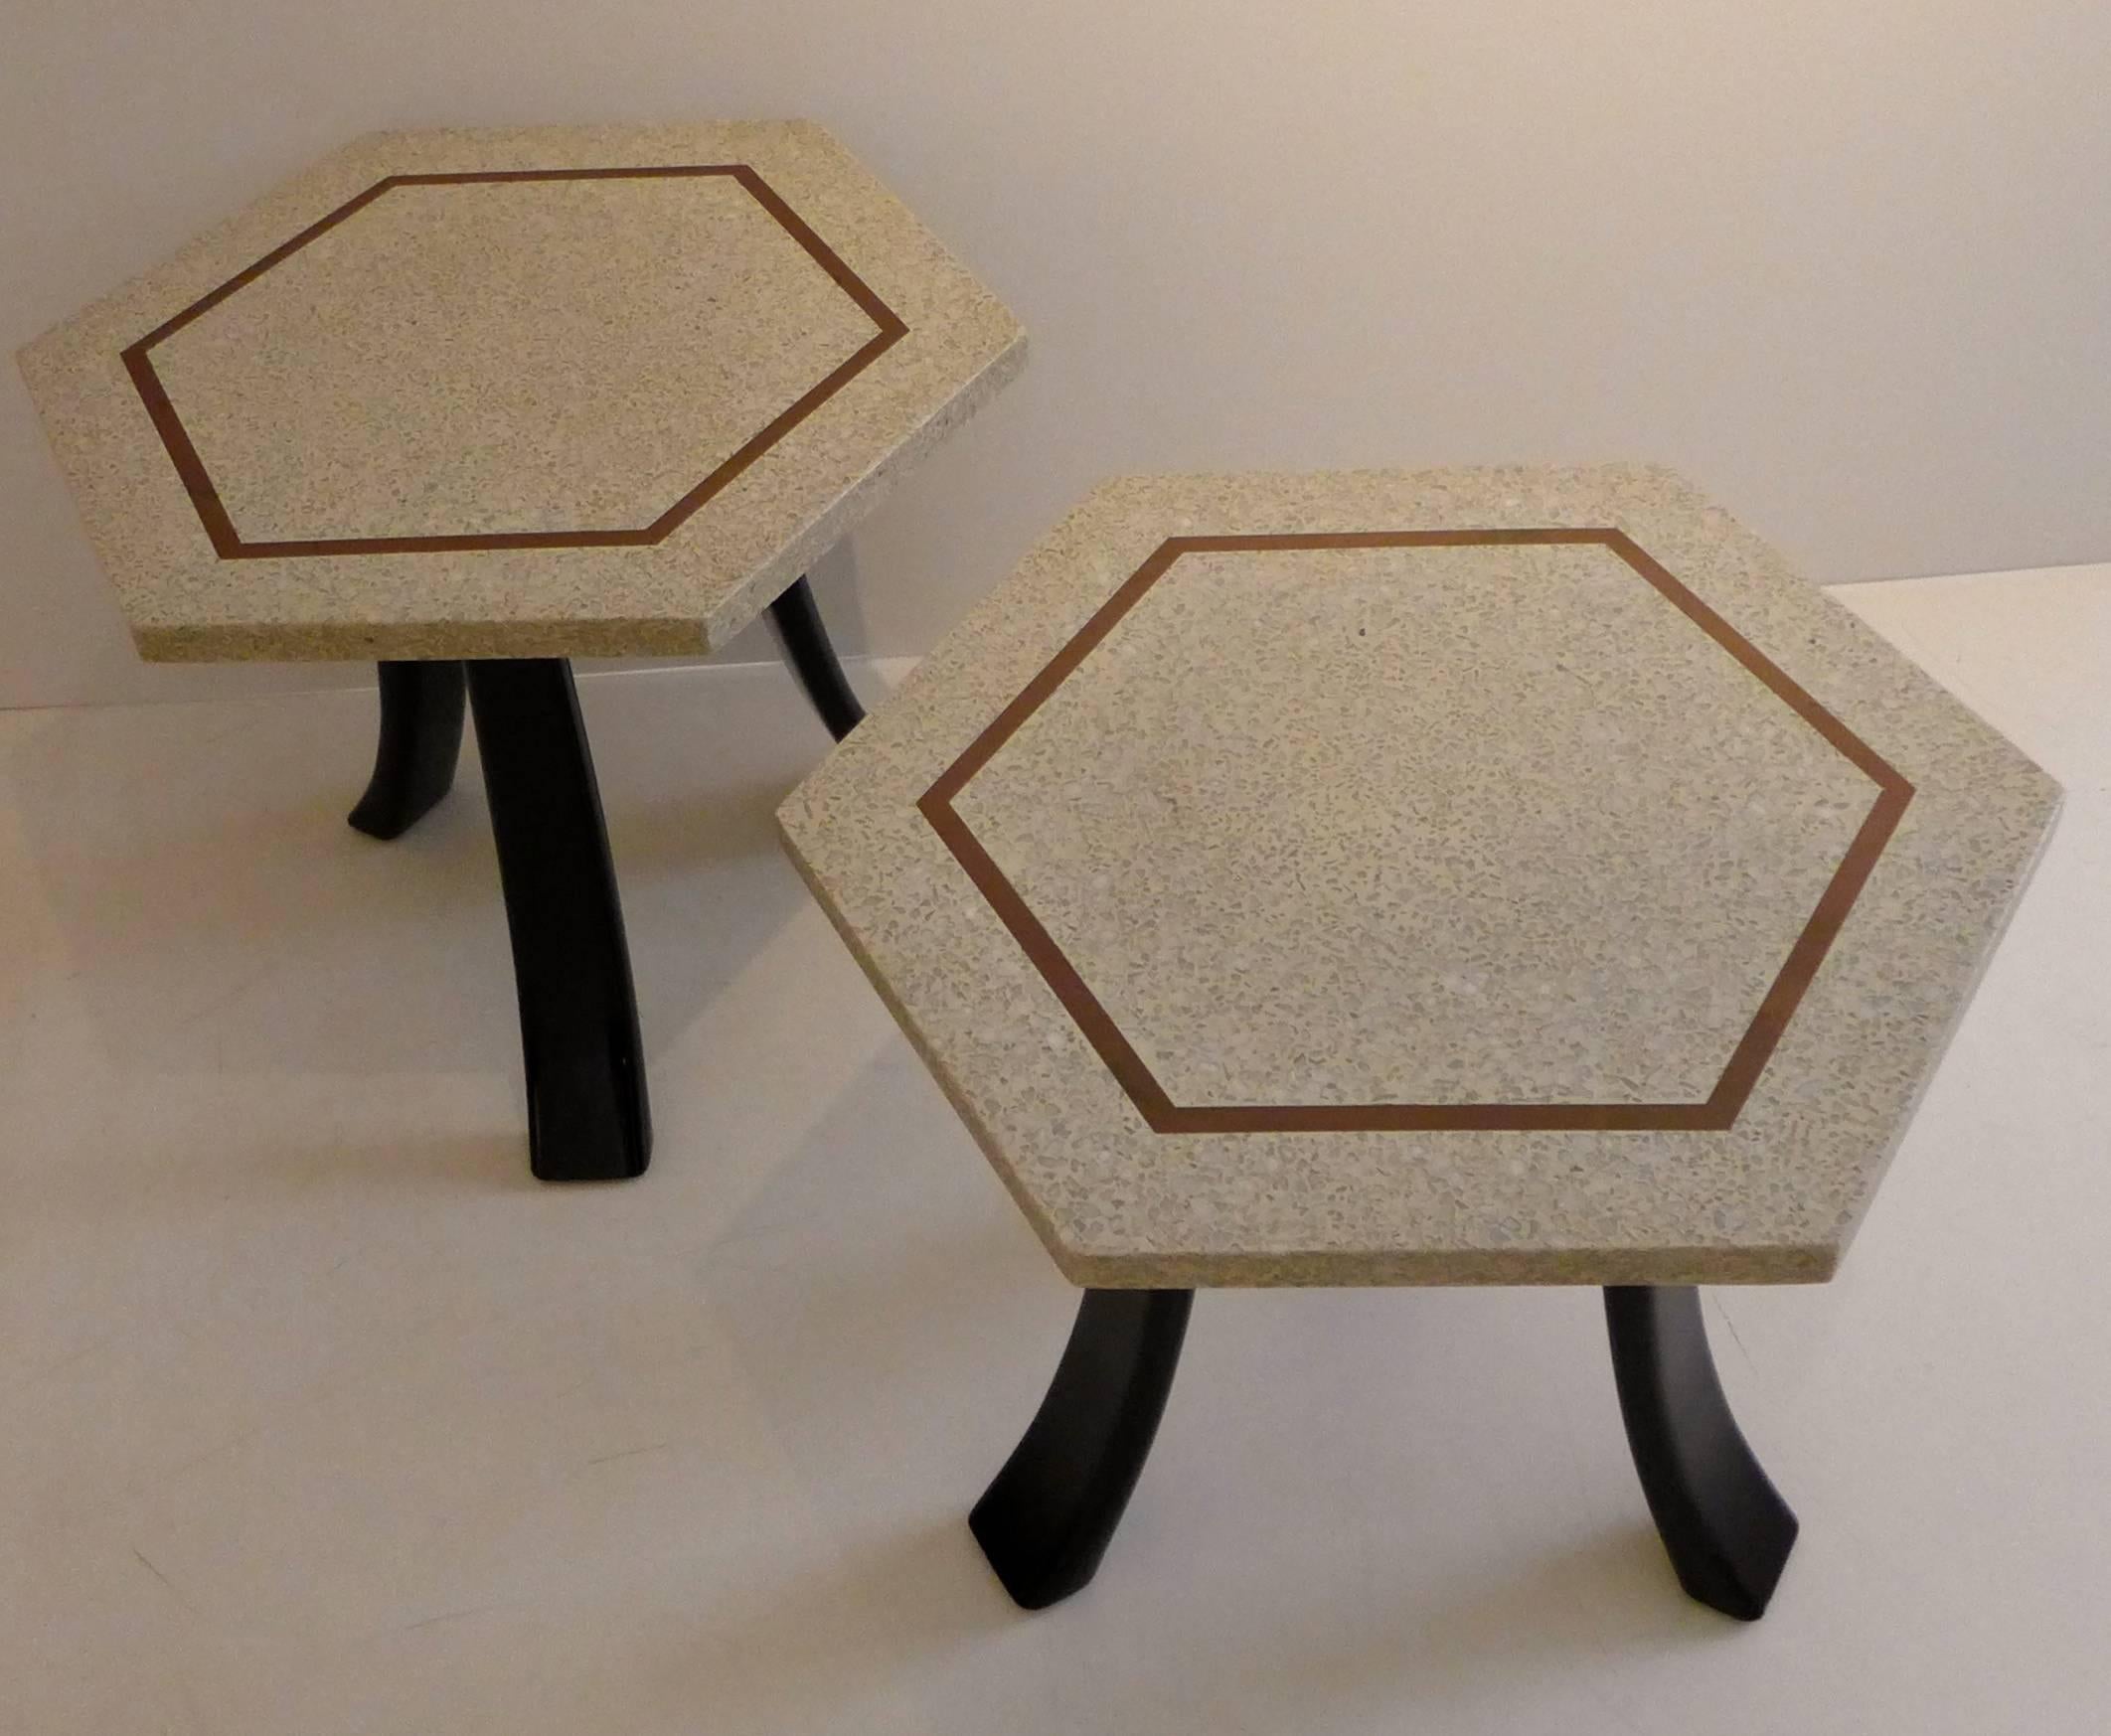 Pair of side tables designed and produced by Harvey Probber, with hexagonal terrazzo marble tops inlaid with brass, and splayed solid mahogany legs.  Can be used as side tables, small coffee tables, or can be pushed together to make a larger